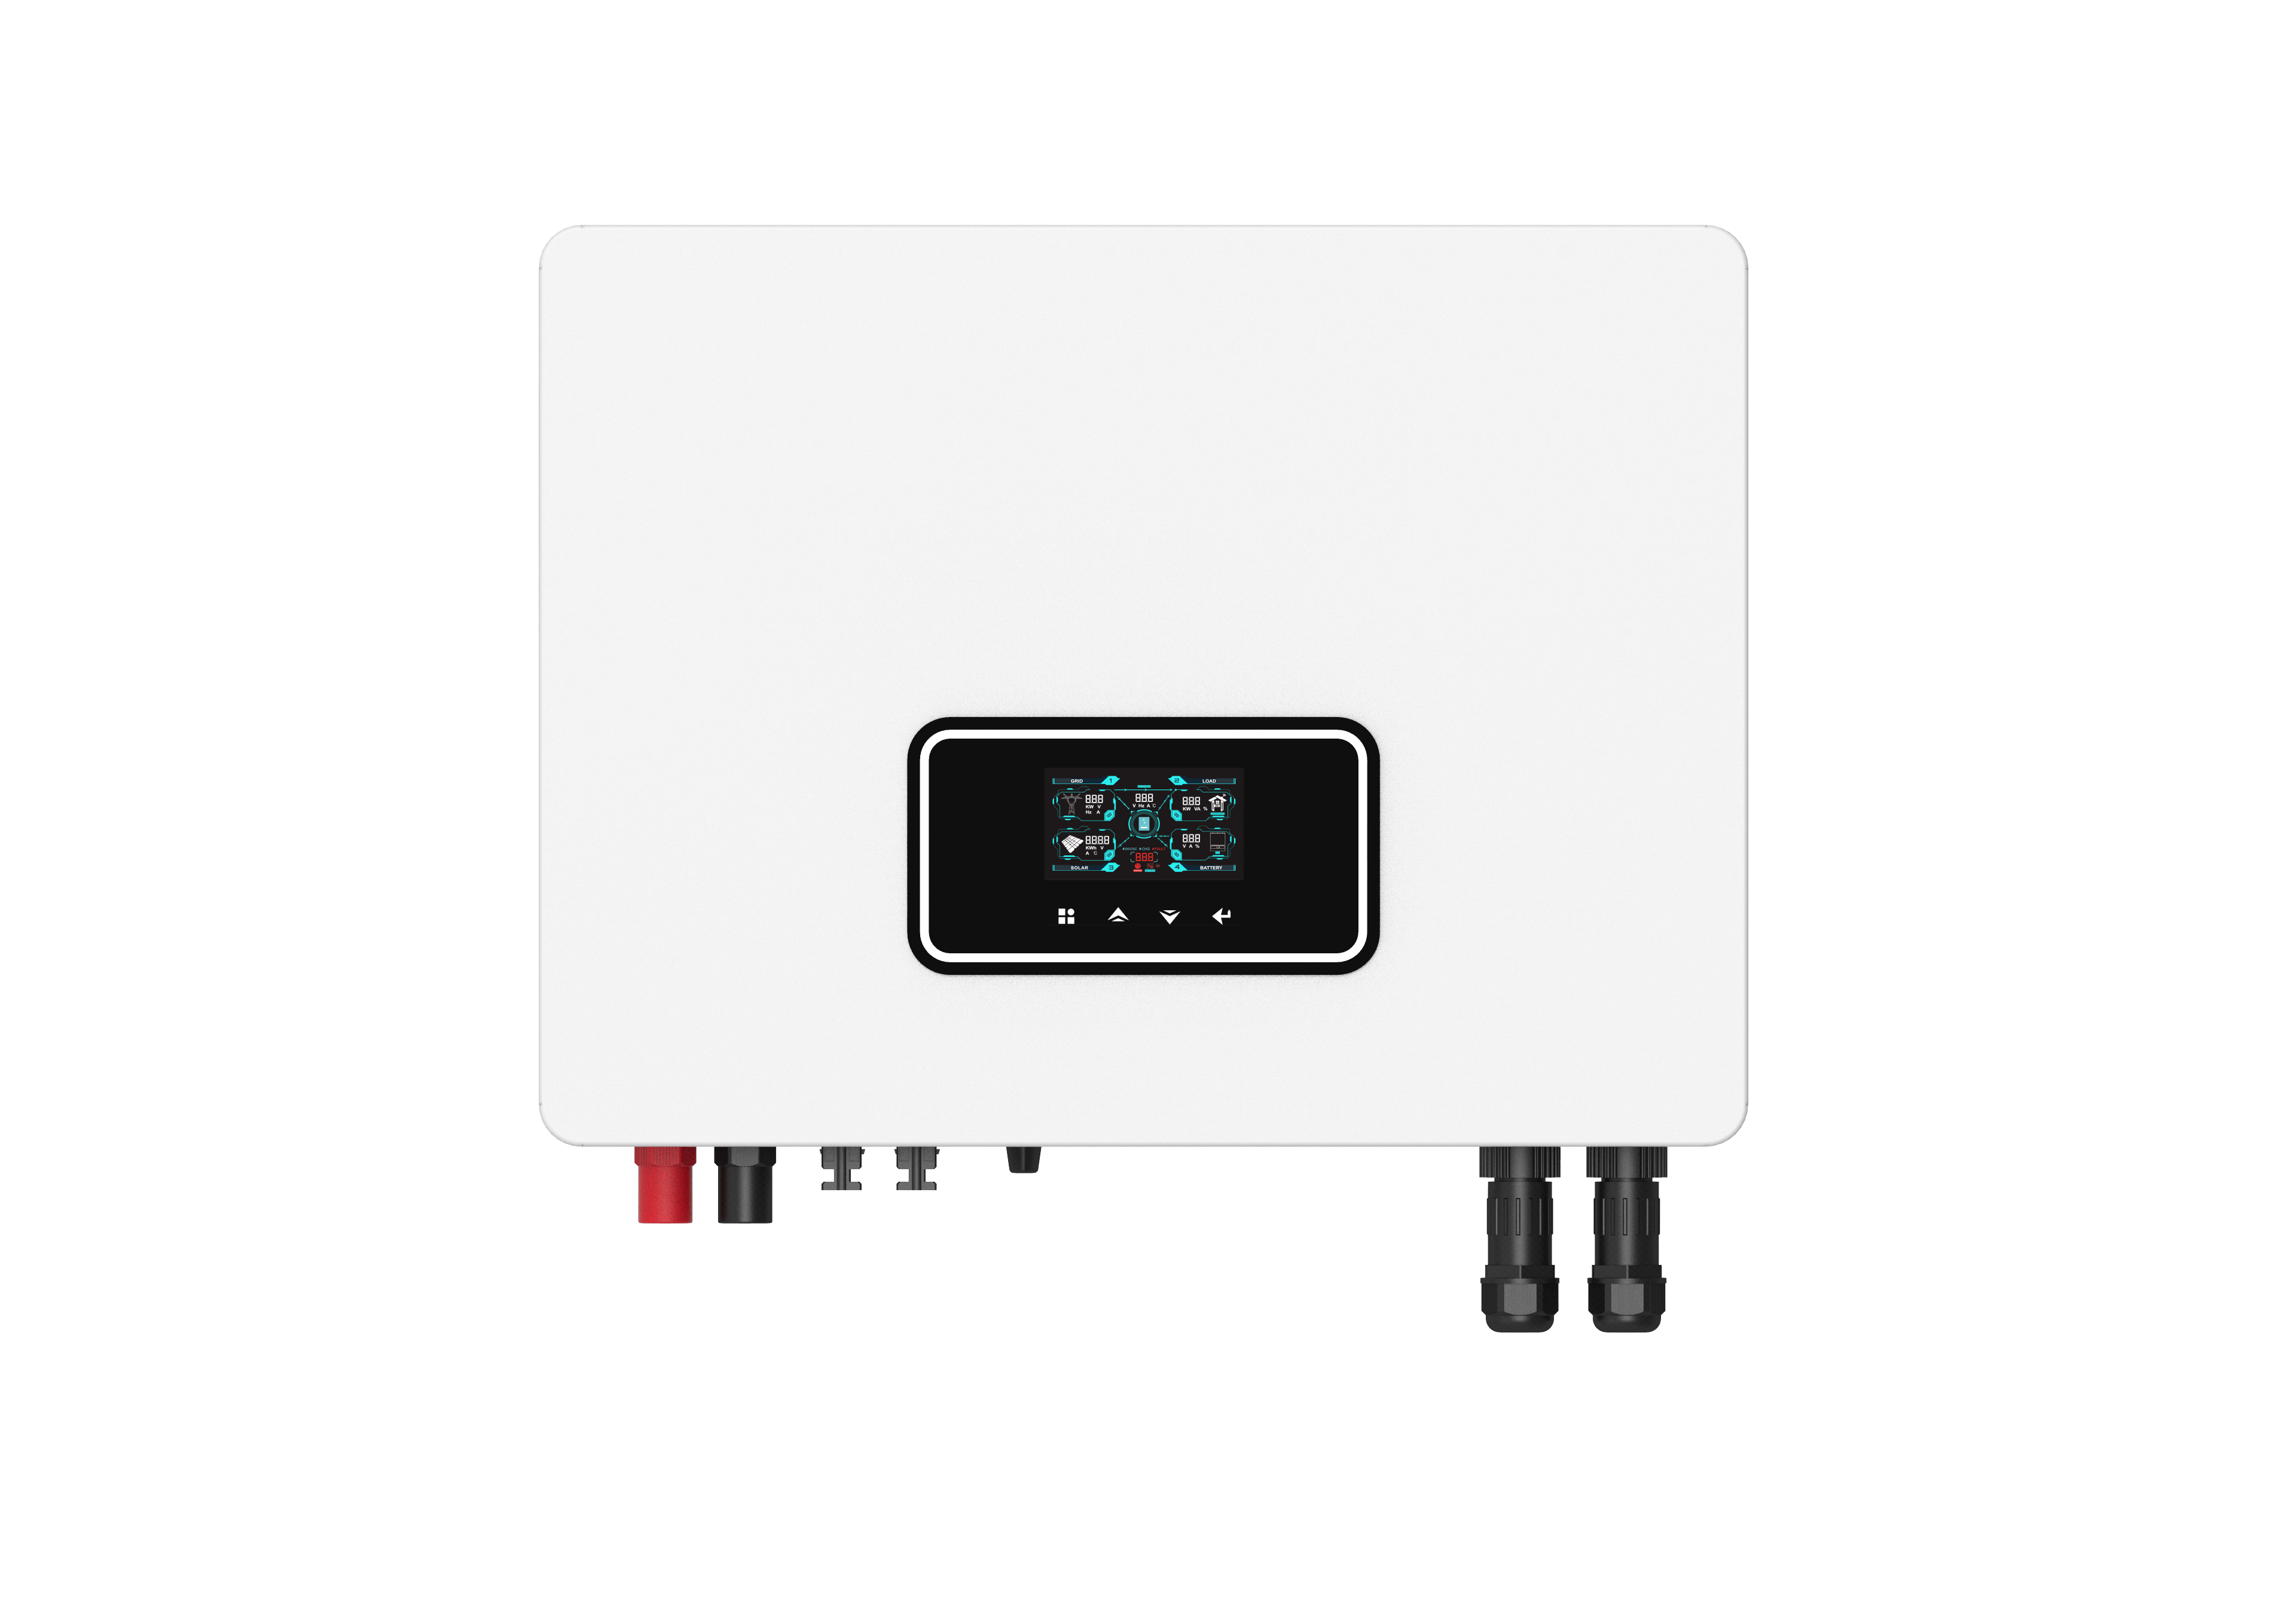 NEXTPOWER 2023 NEW Hybrid inverter Sun series IP 65 Degree of protection parallel operation up to 9 units Dual PV input